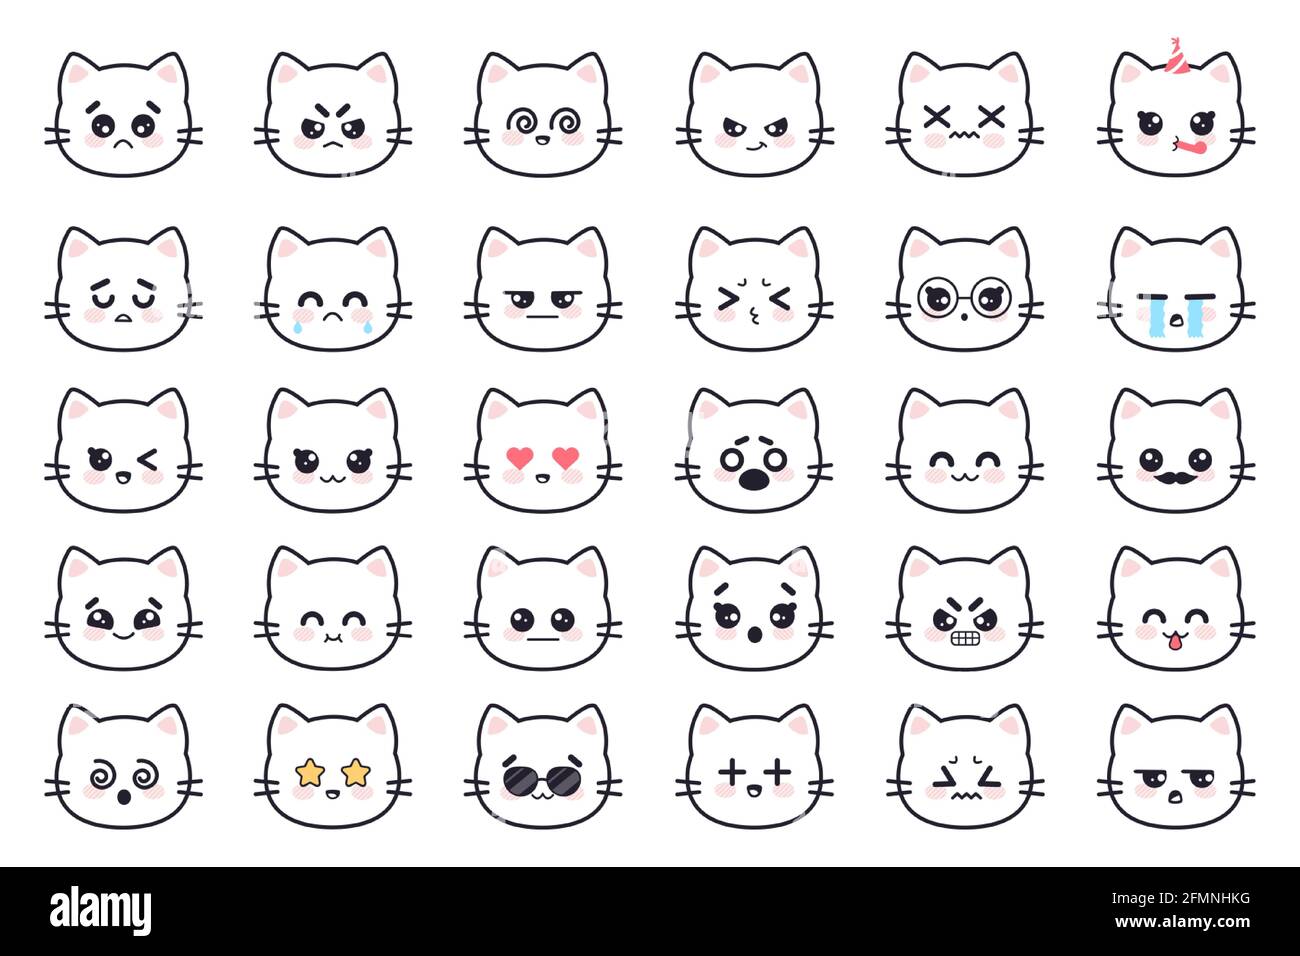 Kawaii cats. White kitty head anime avatars with various emotions fear, cry  and anger, apathy and